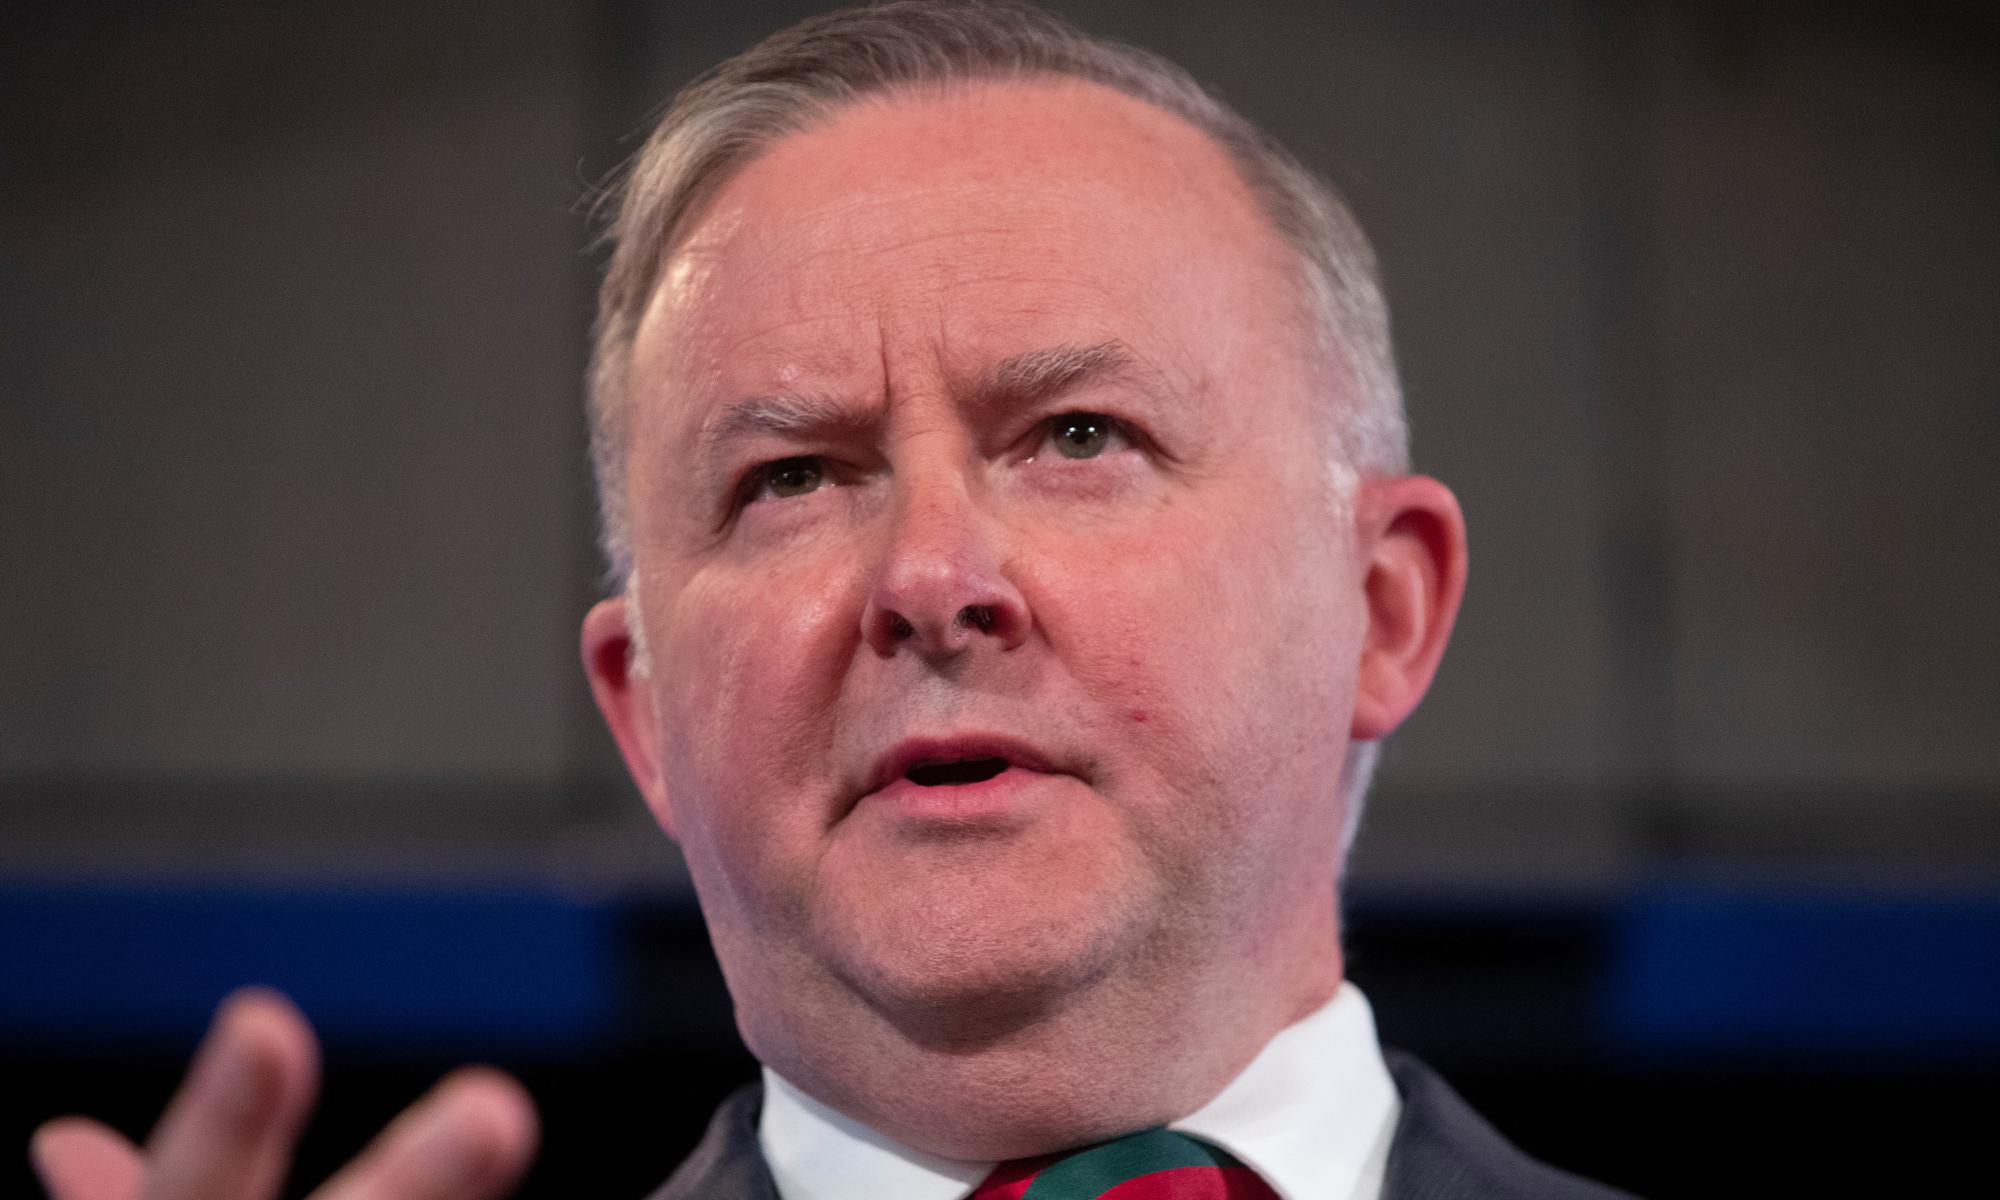 Australia can be a 'renewable energy superpower', Anthony Albanese declares